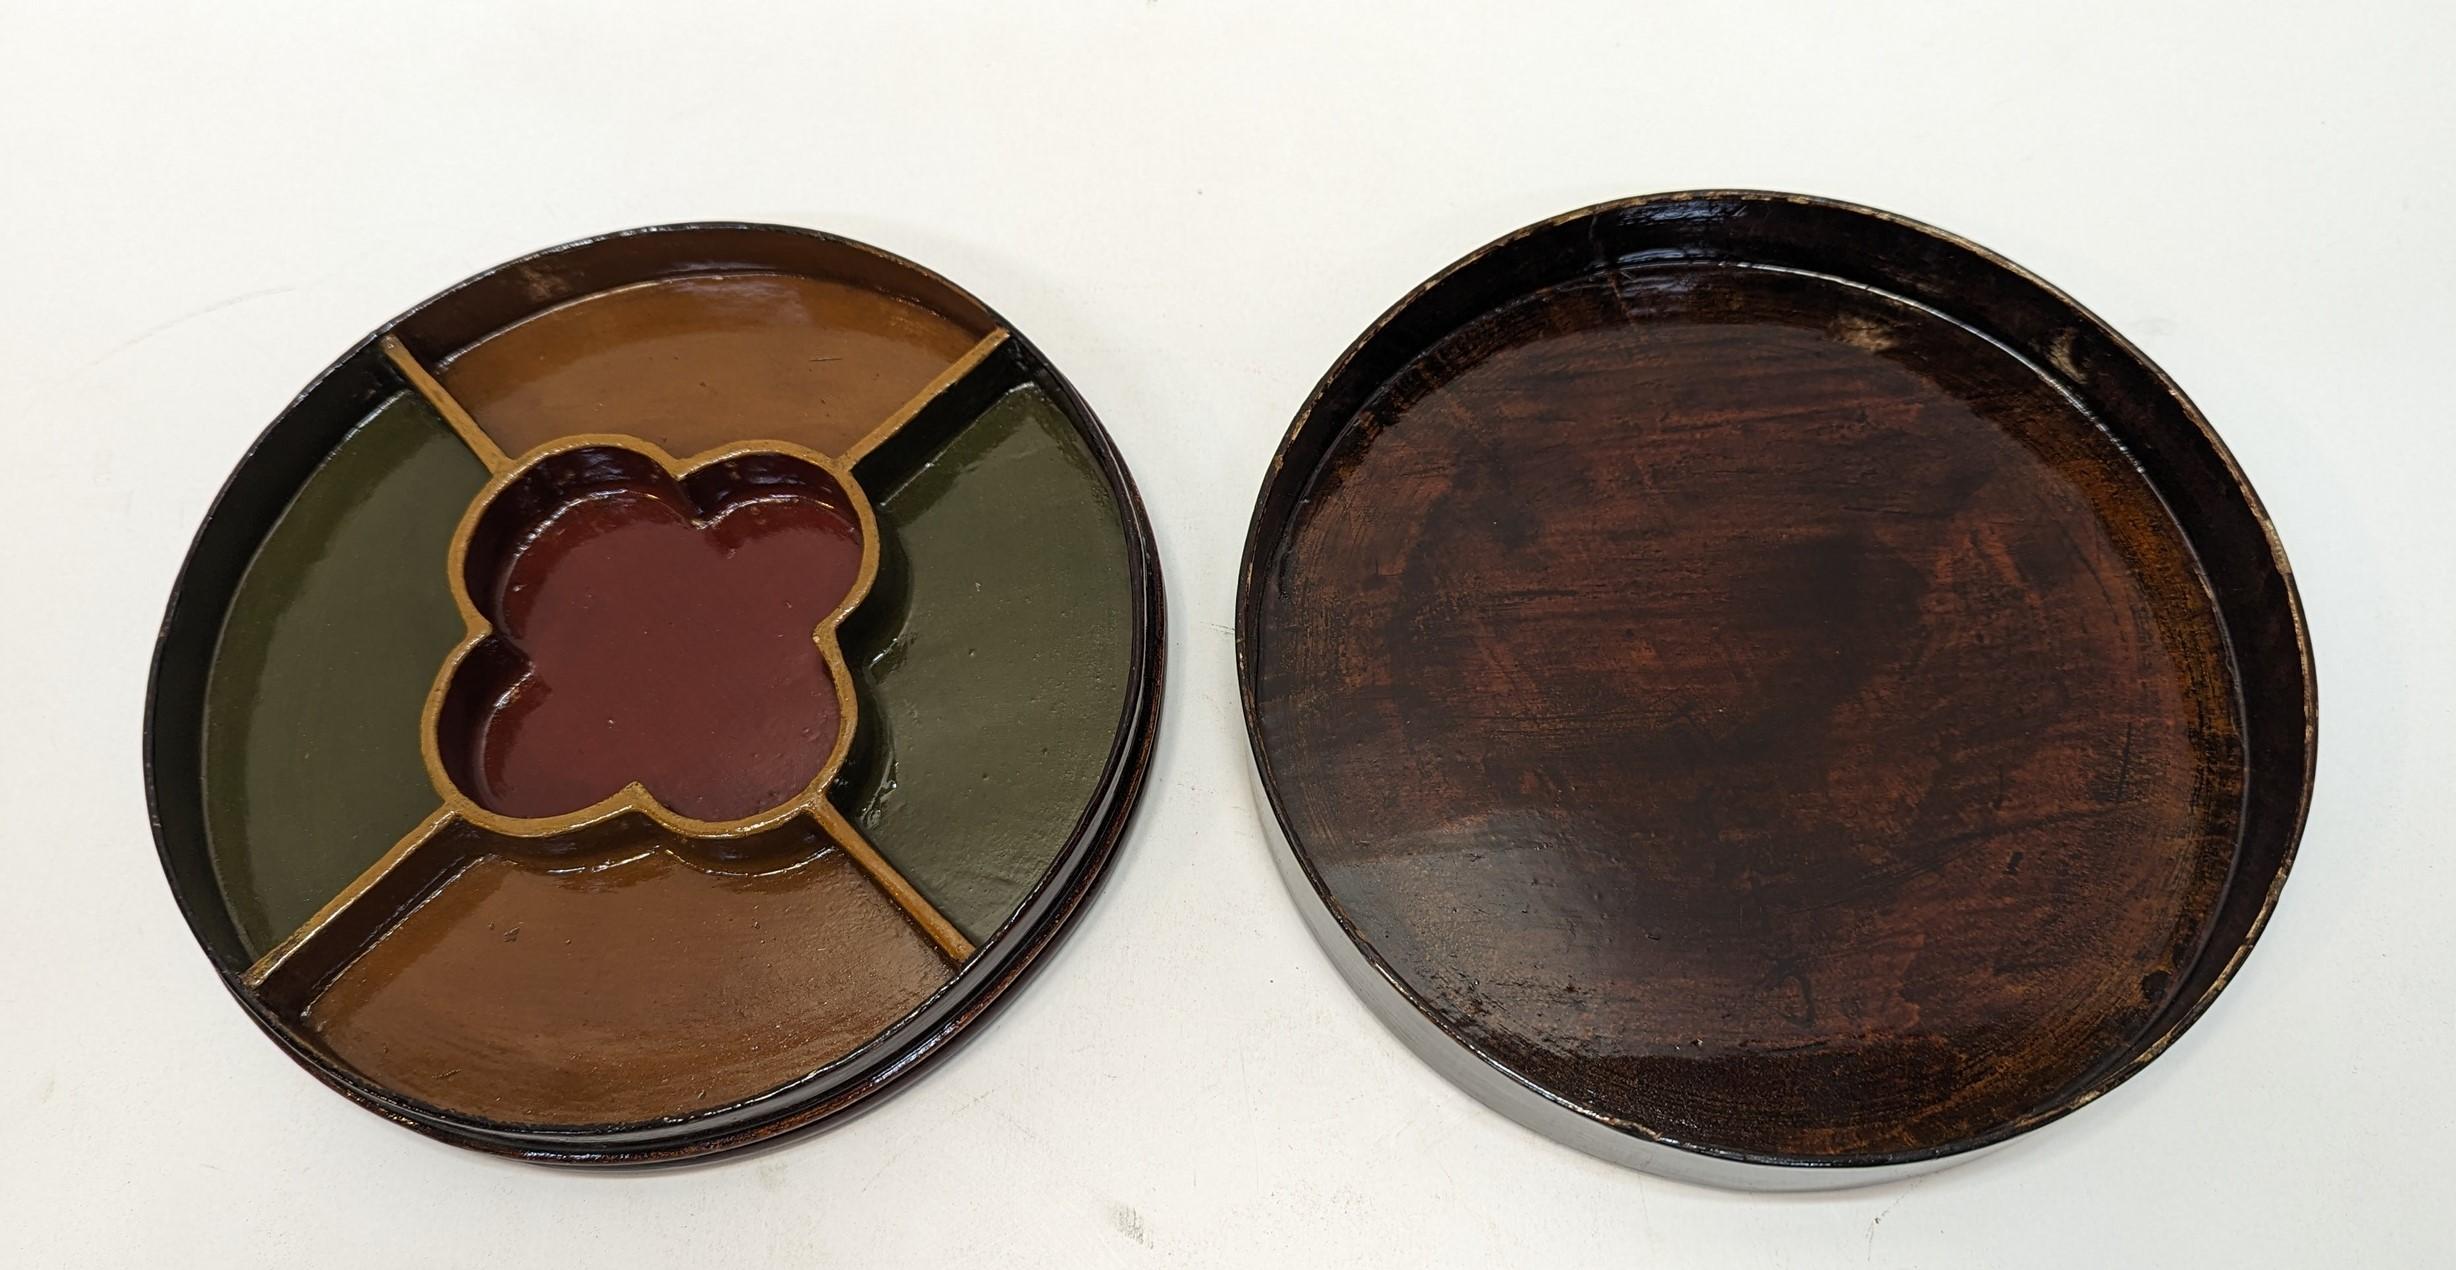 Antique Deco Round Lacquer Box.  Antique Chinese Round Lacquer Box used for special delicate sweets and or holding special jewelry.  Art Deco period in Shanghai, 1920-40.  Constructed wood with gesso and lacquers.  The inside has a clover shaped